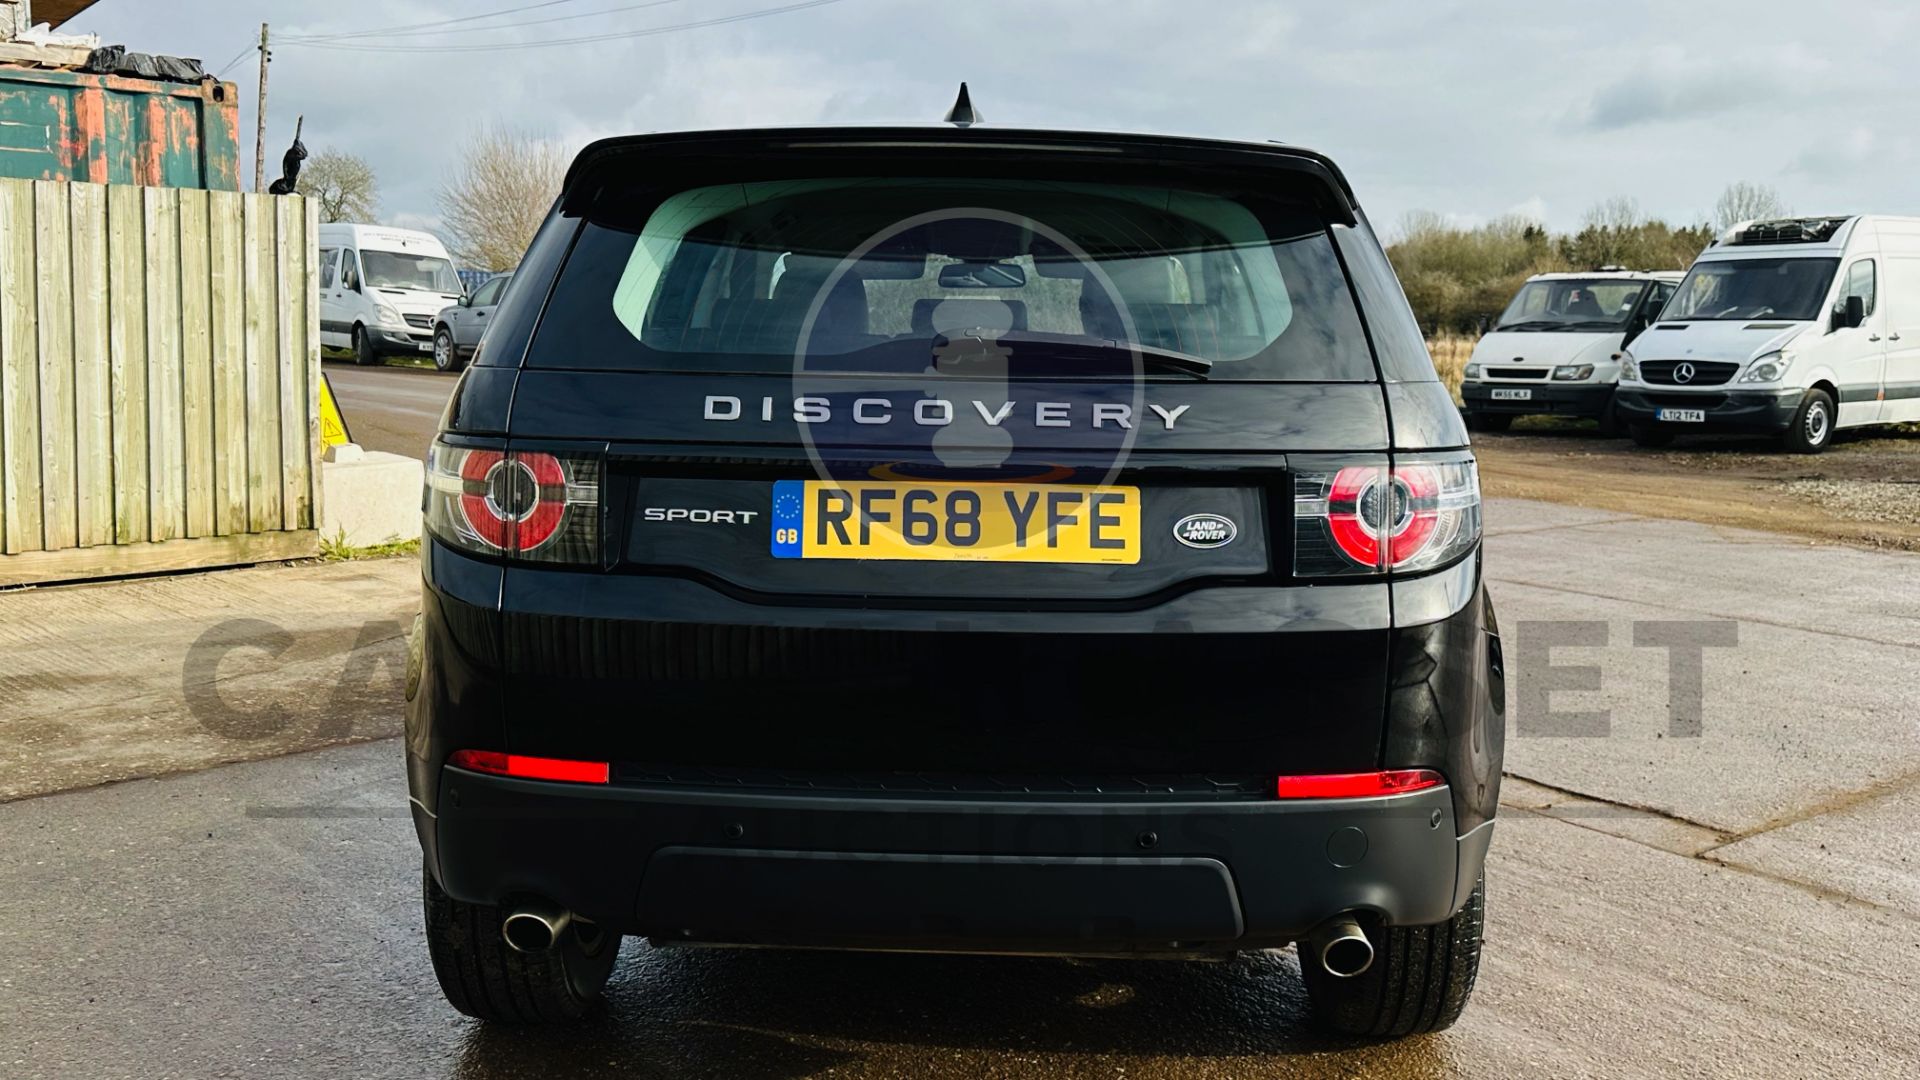 (On Sale) LAND ROVER DISCOVERY SPORT *5 DOOR* (2019 - EURO 6) 2.0 ED4 - AUTO STOP/START *HUGE SPEC* - Image 11 of 46